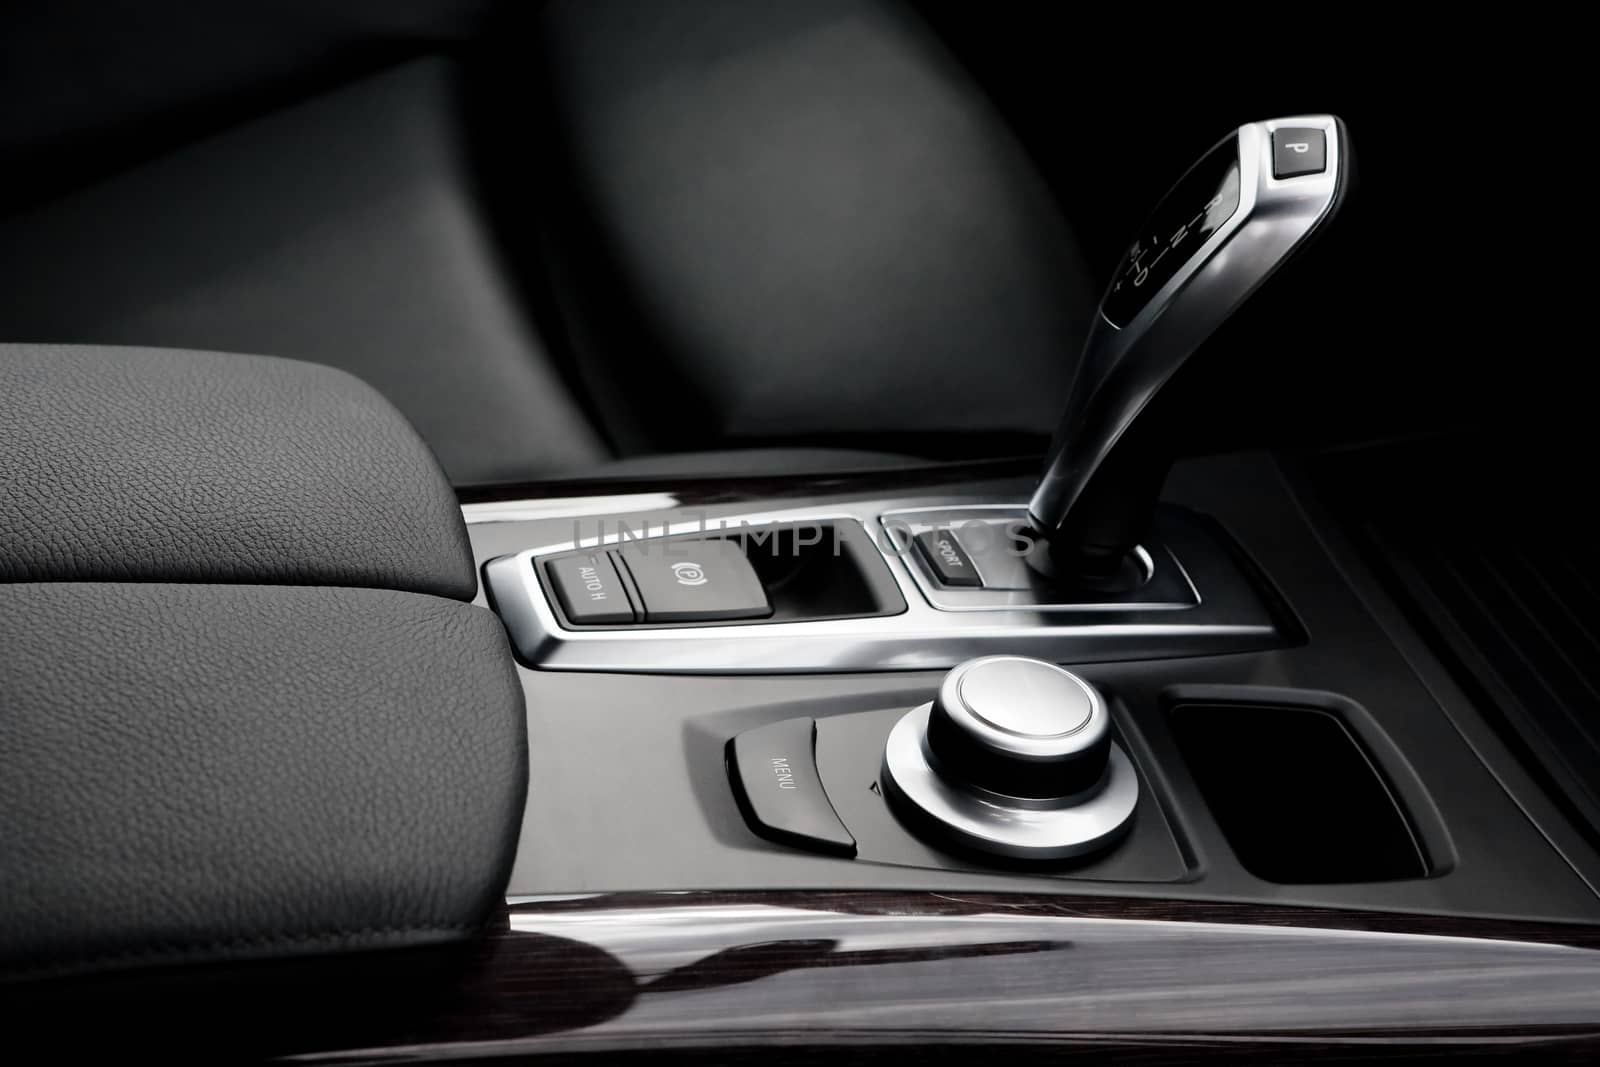 The gear shift lever in the modern car